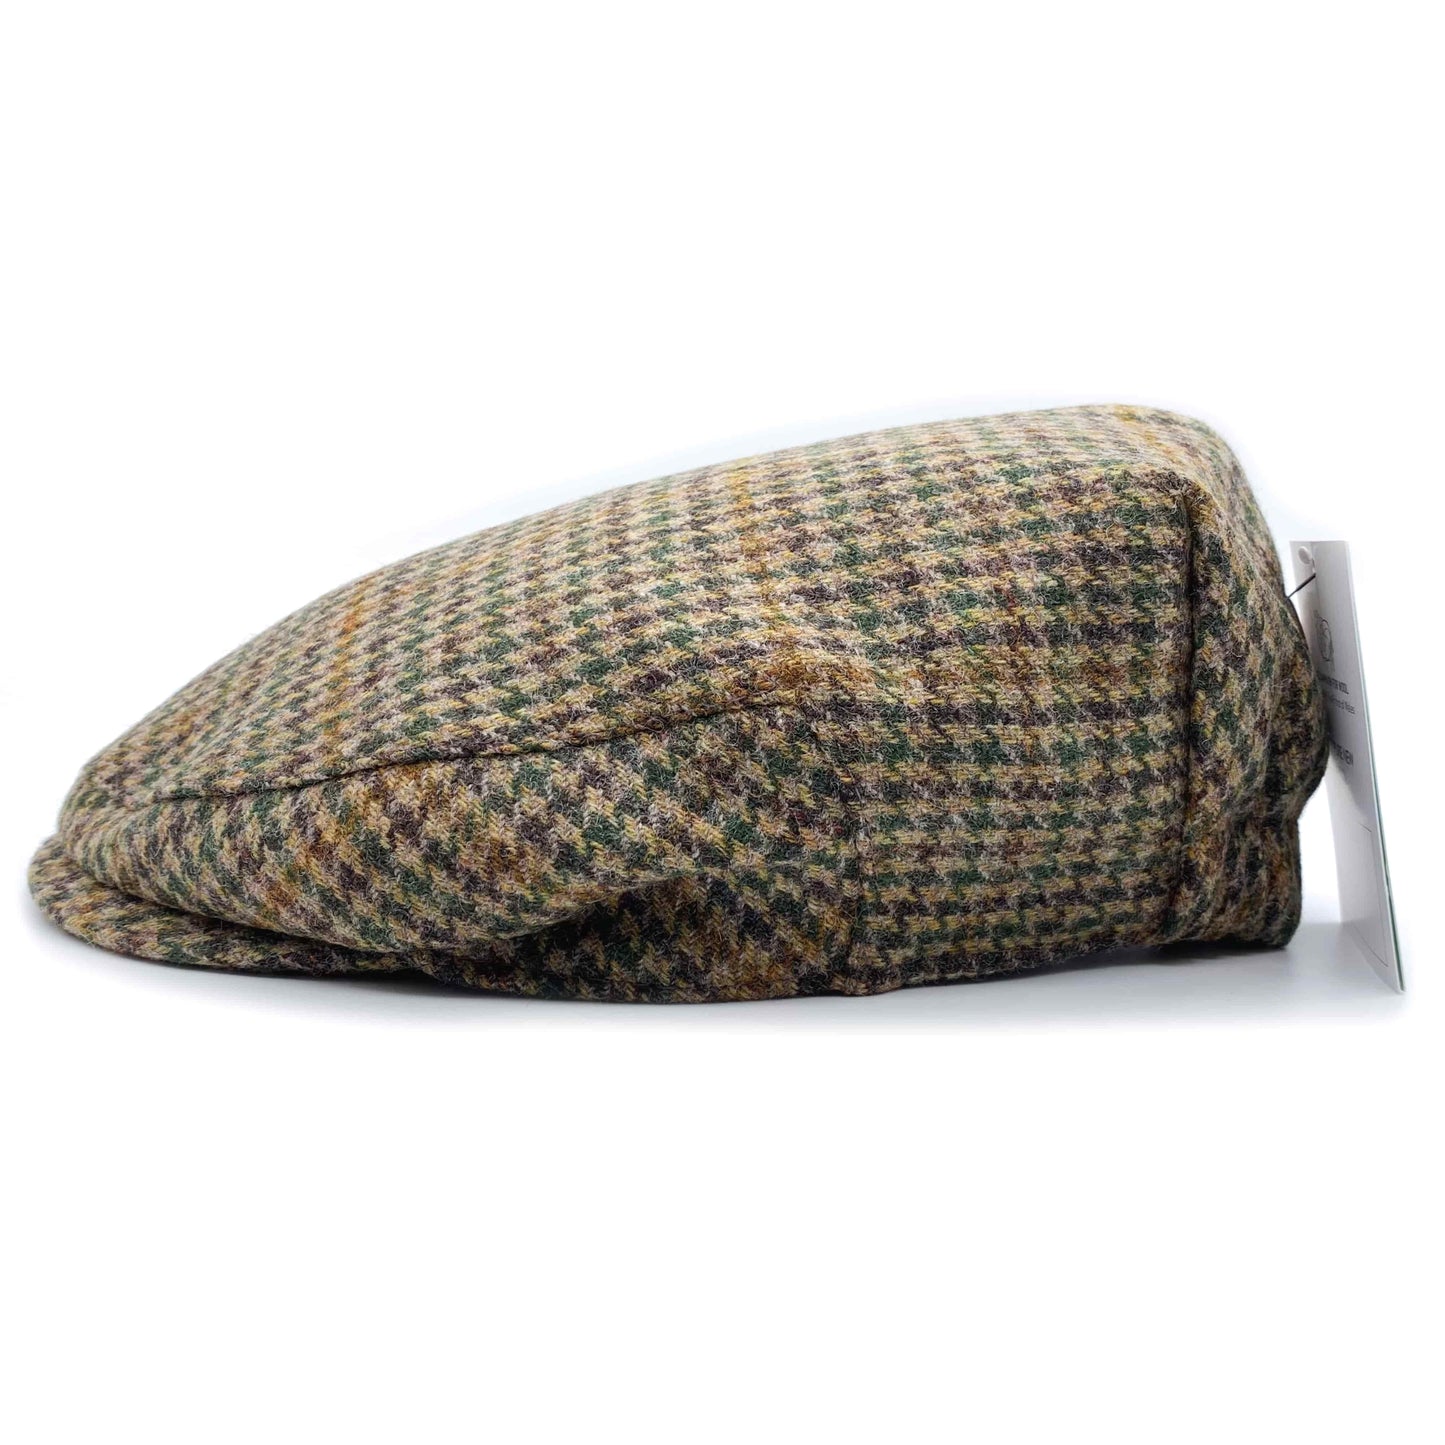 Yorkshire Terrier Traditional Wool Flat Cap - The Great Yorkshire Shop